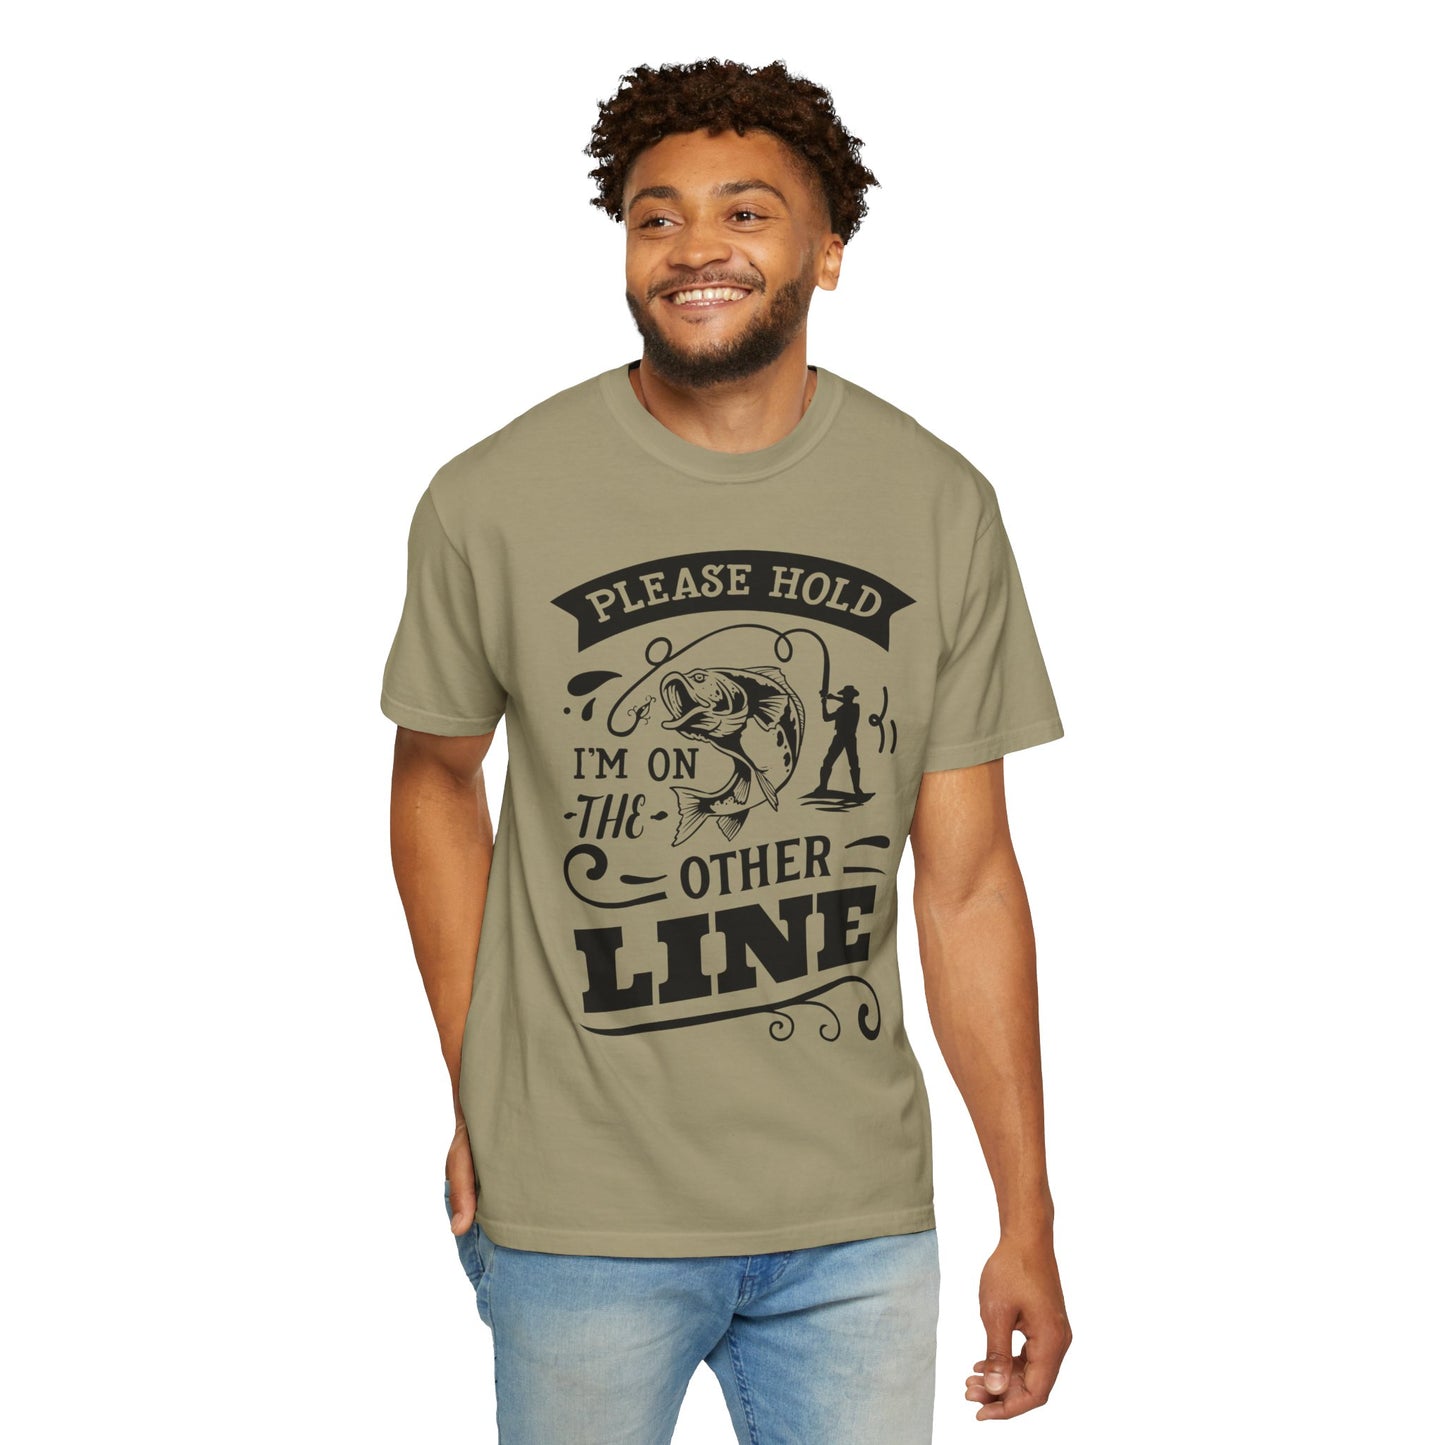 Please hold I'm on another line: Unisex Garment-Dyed T-shirt